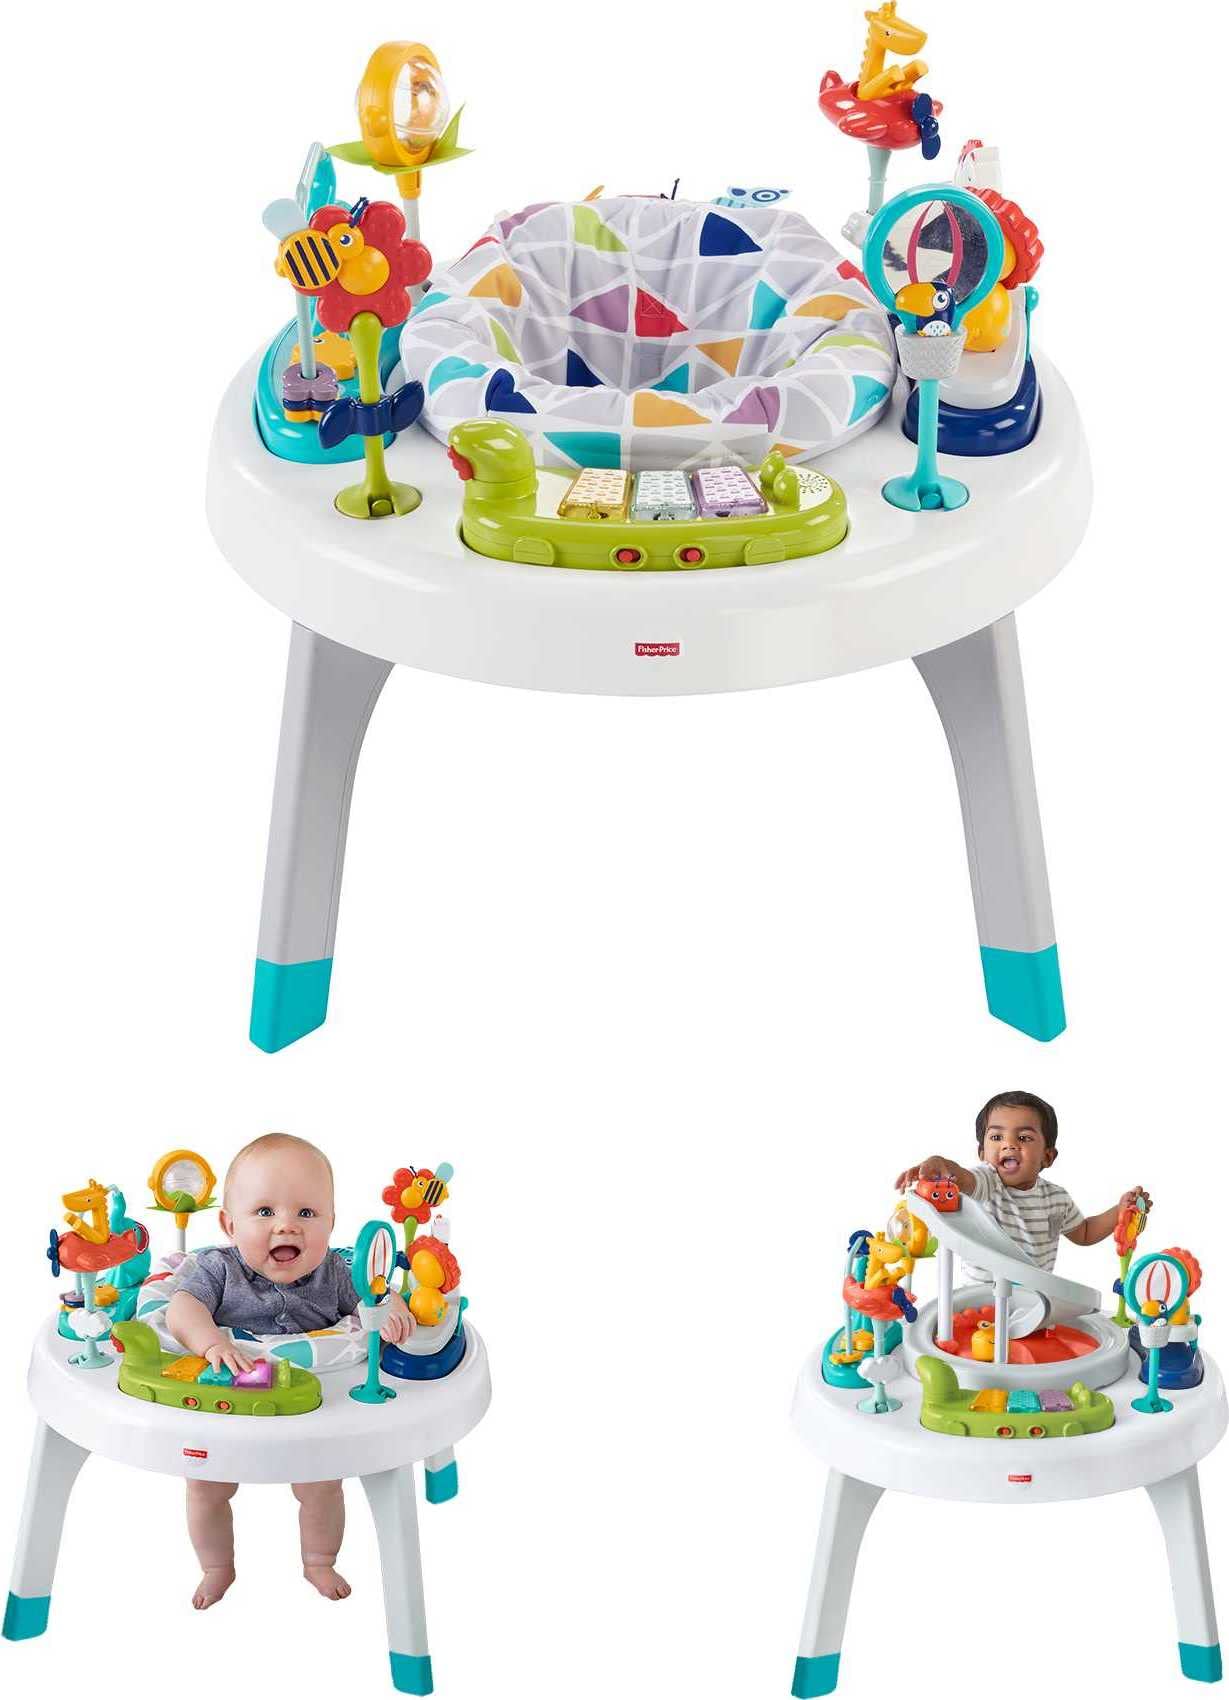 Fisher-Price Baby & Toddler 2-in-1 Sit-to-Stand Activity Center (Safari) $69.71 + Free Shipping